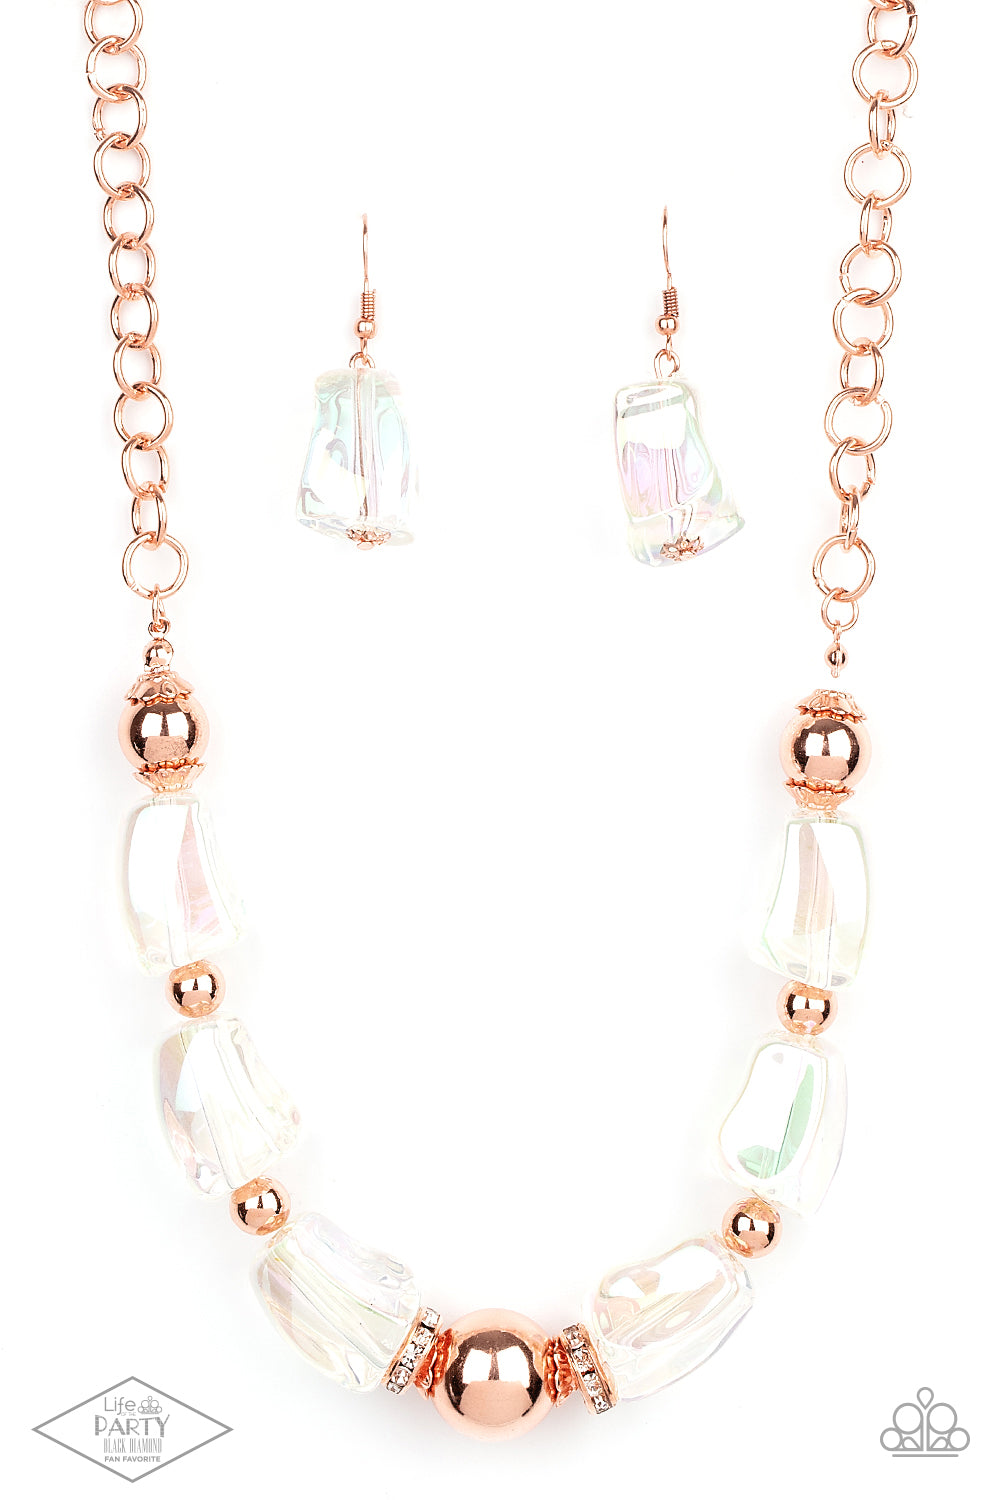 Iridescently Ice Queen - Copper Iridescent Necklaces featuring an icy iridescence, glassy asymmetrical beads join a mismatched collection of shiny copper beads, white rhinestone encrusted rings, and scalloped shiny copper accents below the collar. Attached to a shiny copper chain, the glacial display catches and reflects light for a statement-making finish. Features an adjustable clasp closure.  Sold as one individual necklace. Includes one pair of matching earrings.